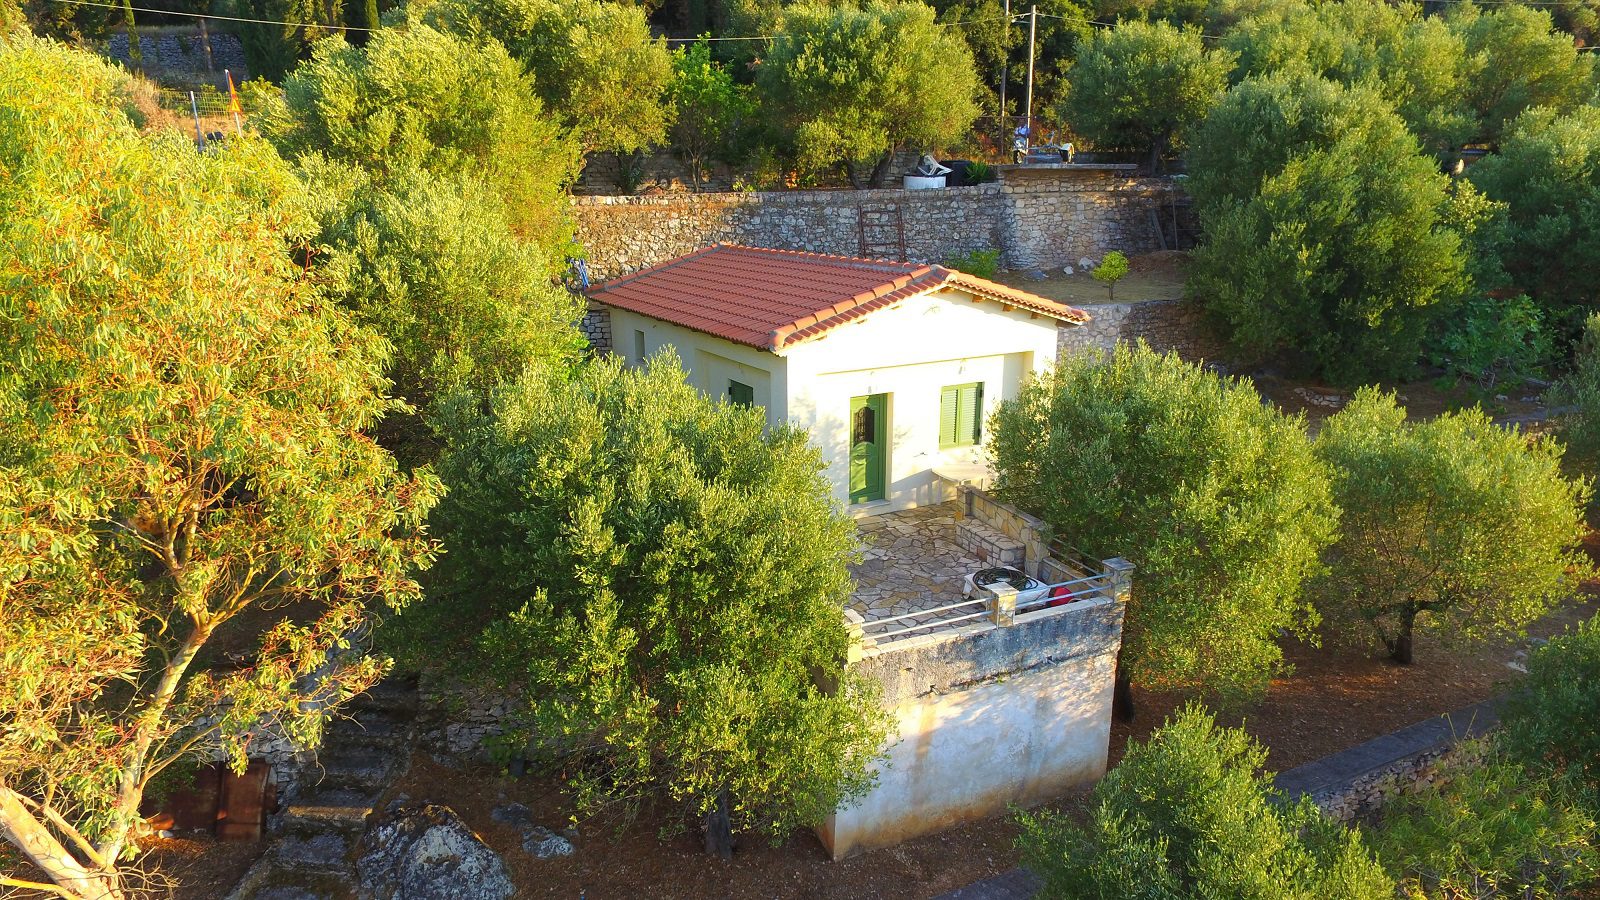 Aerial Landscape and sea view of coastal house for sale in Ithaca Greece Vathi